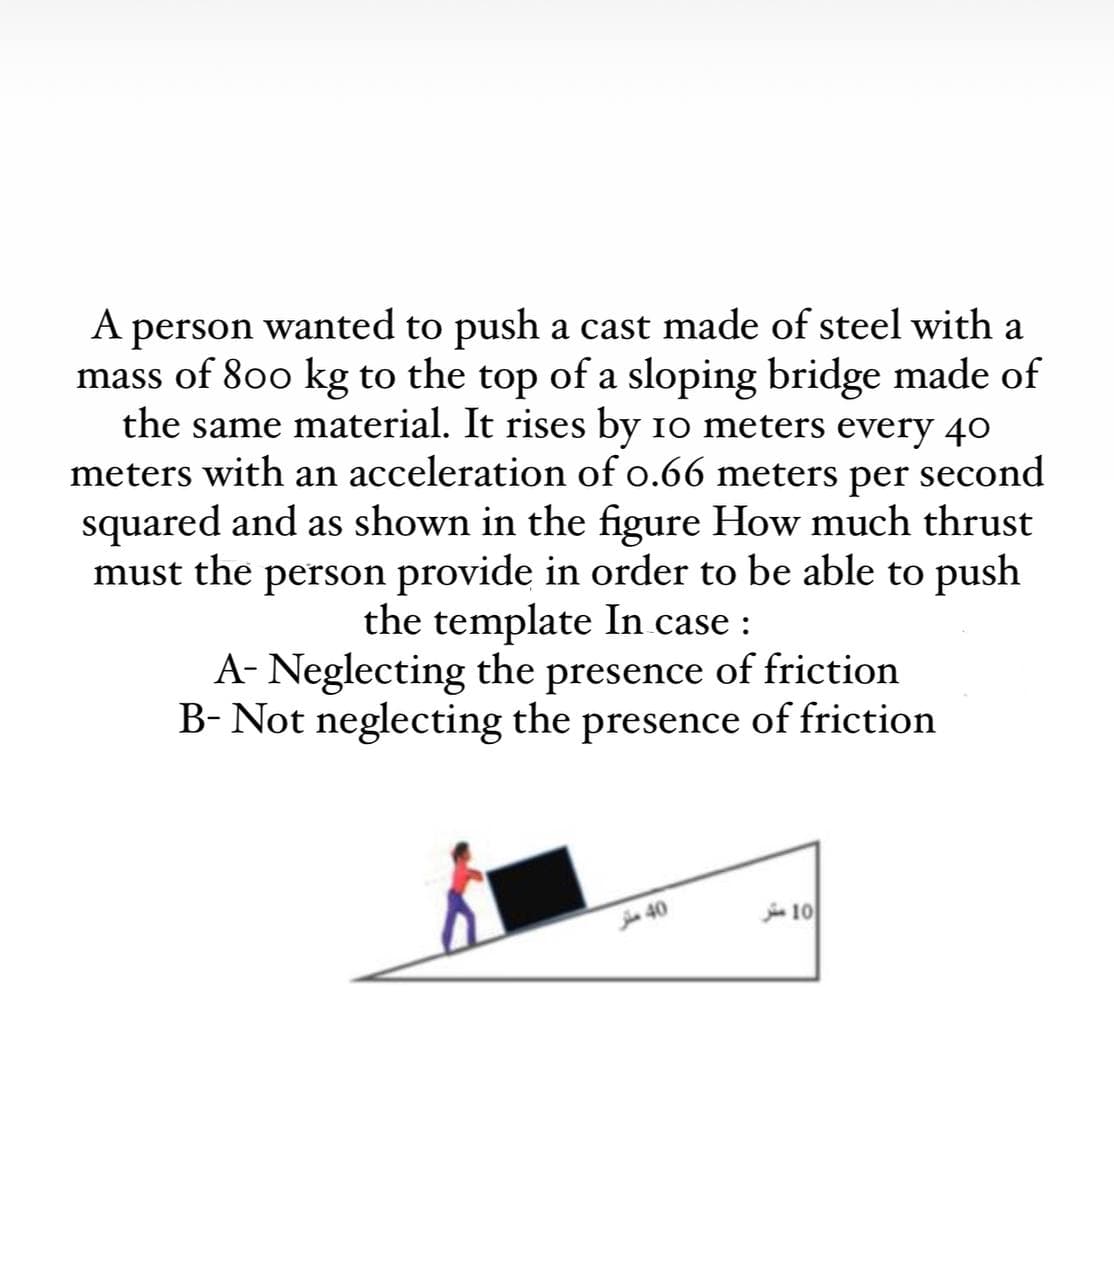 A person wanted to push a cast made of steel with a
mass of 800 kg to the top of a sloping bridge made of
the same material. It rises by 10 meters every 40
meters with an acceleration of o.66 meters per second
squared and as shown in the figure How much thrust
must the person provide in order to be able to push
the template In case :
A- Neglecting the presence of friction
B- Not neglecting the presence of friction
a 40
j 10
